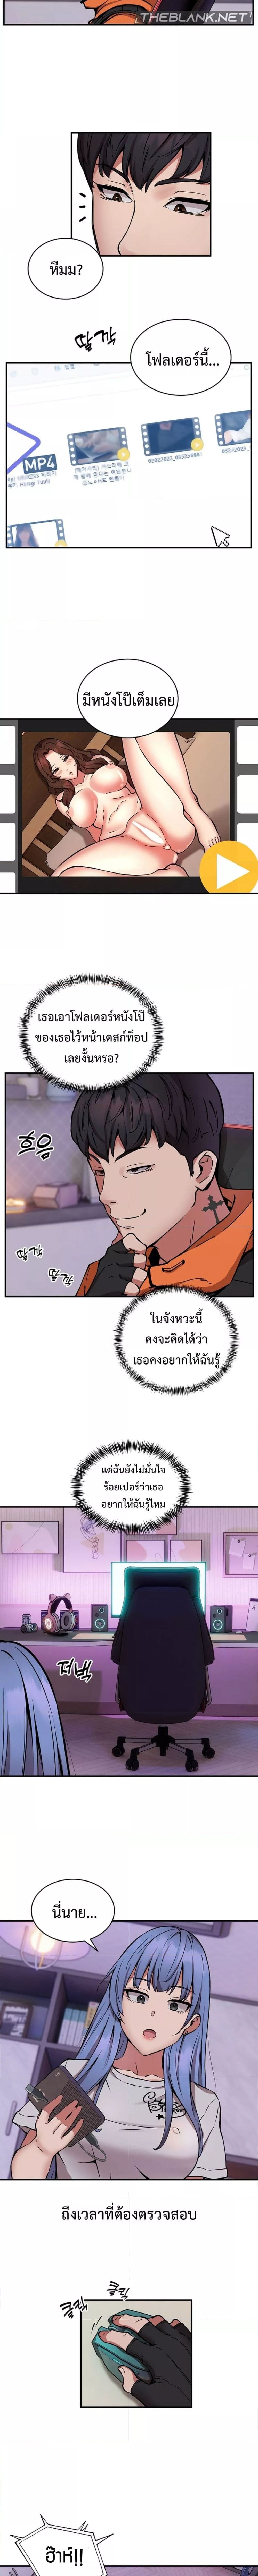 Driver in the New City ตอนที่ 12 ภาพ 4